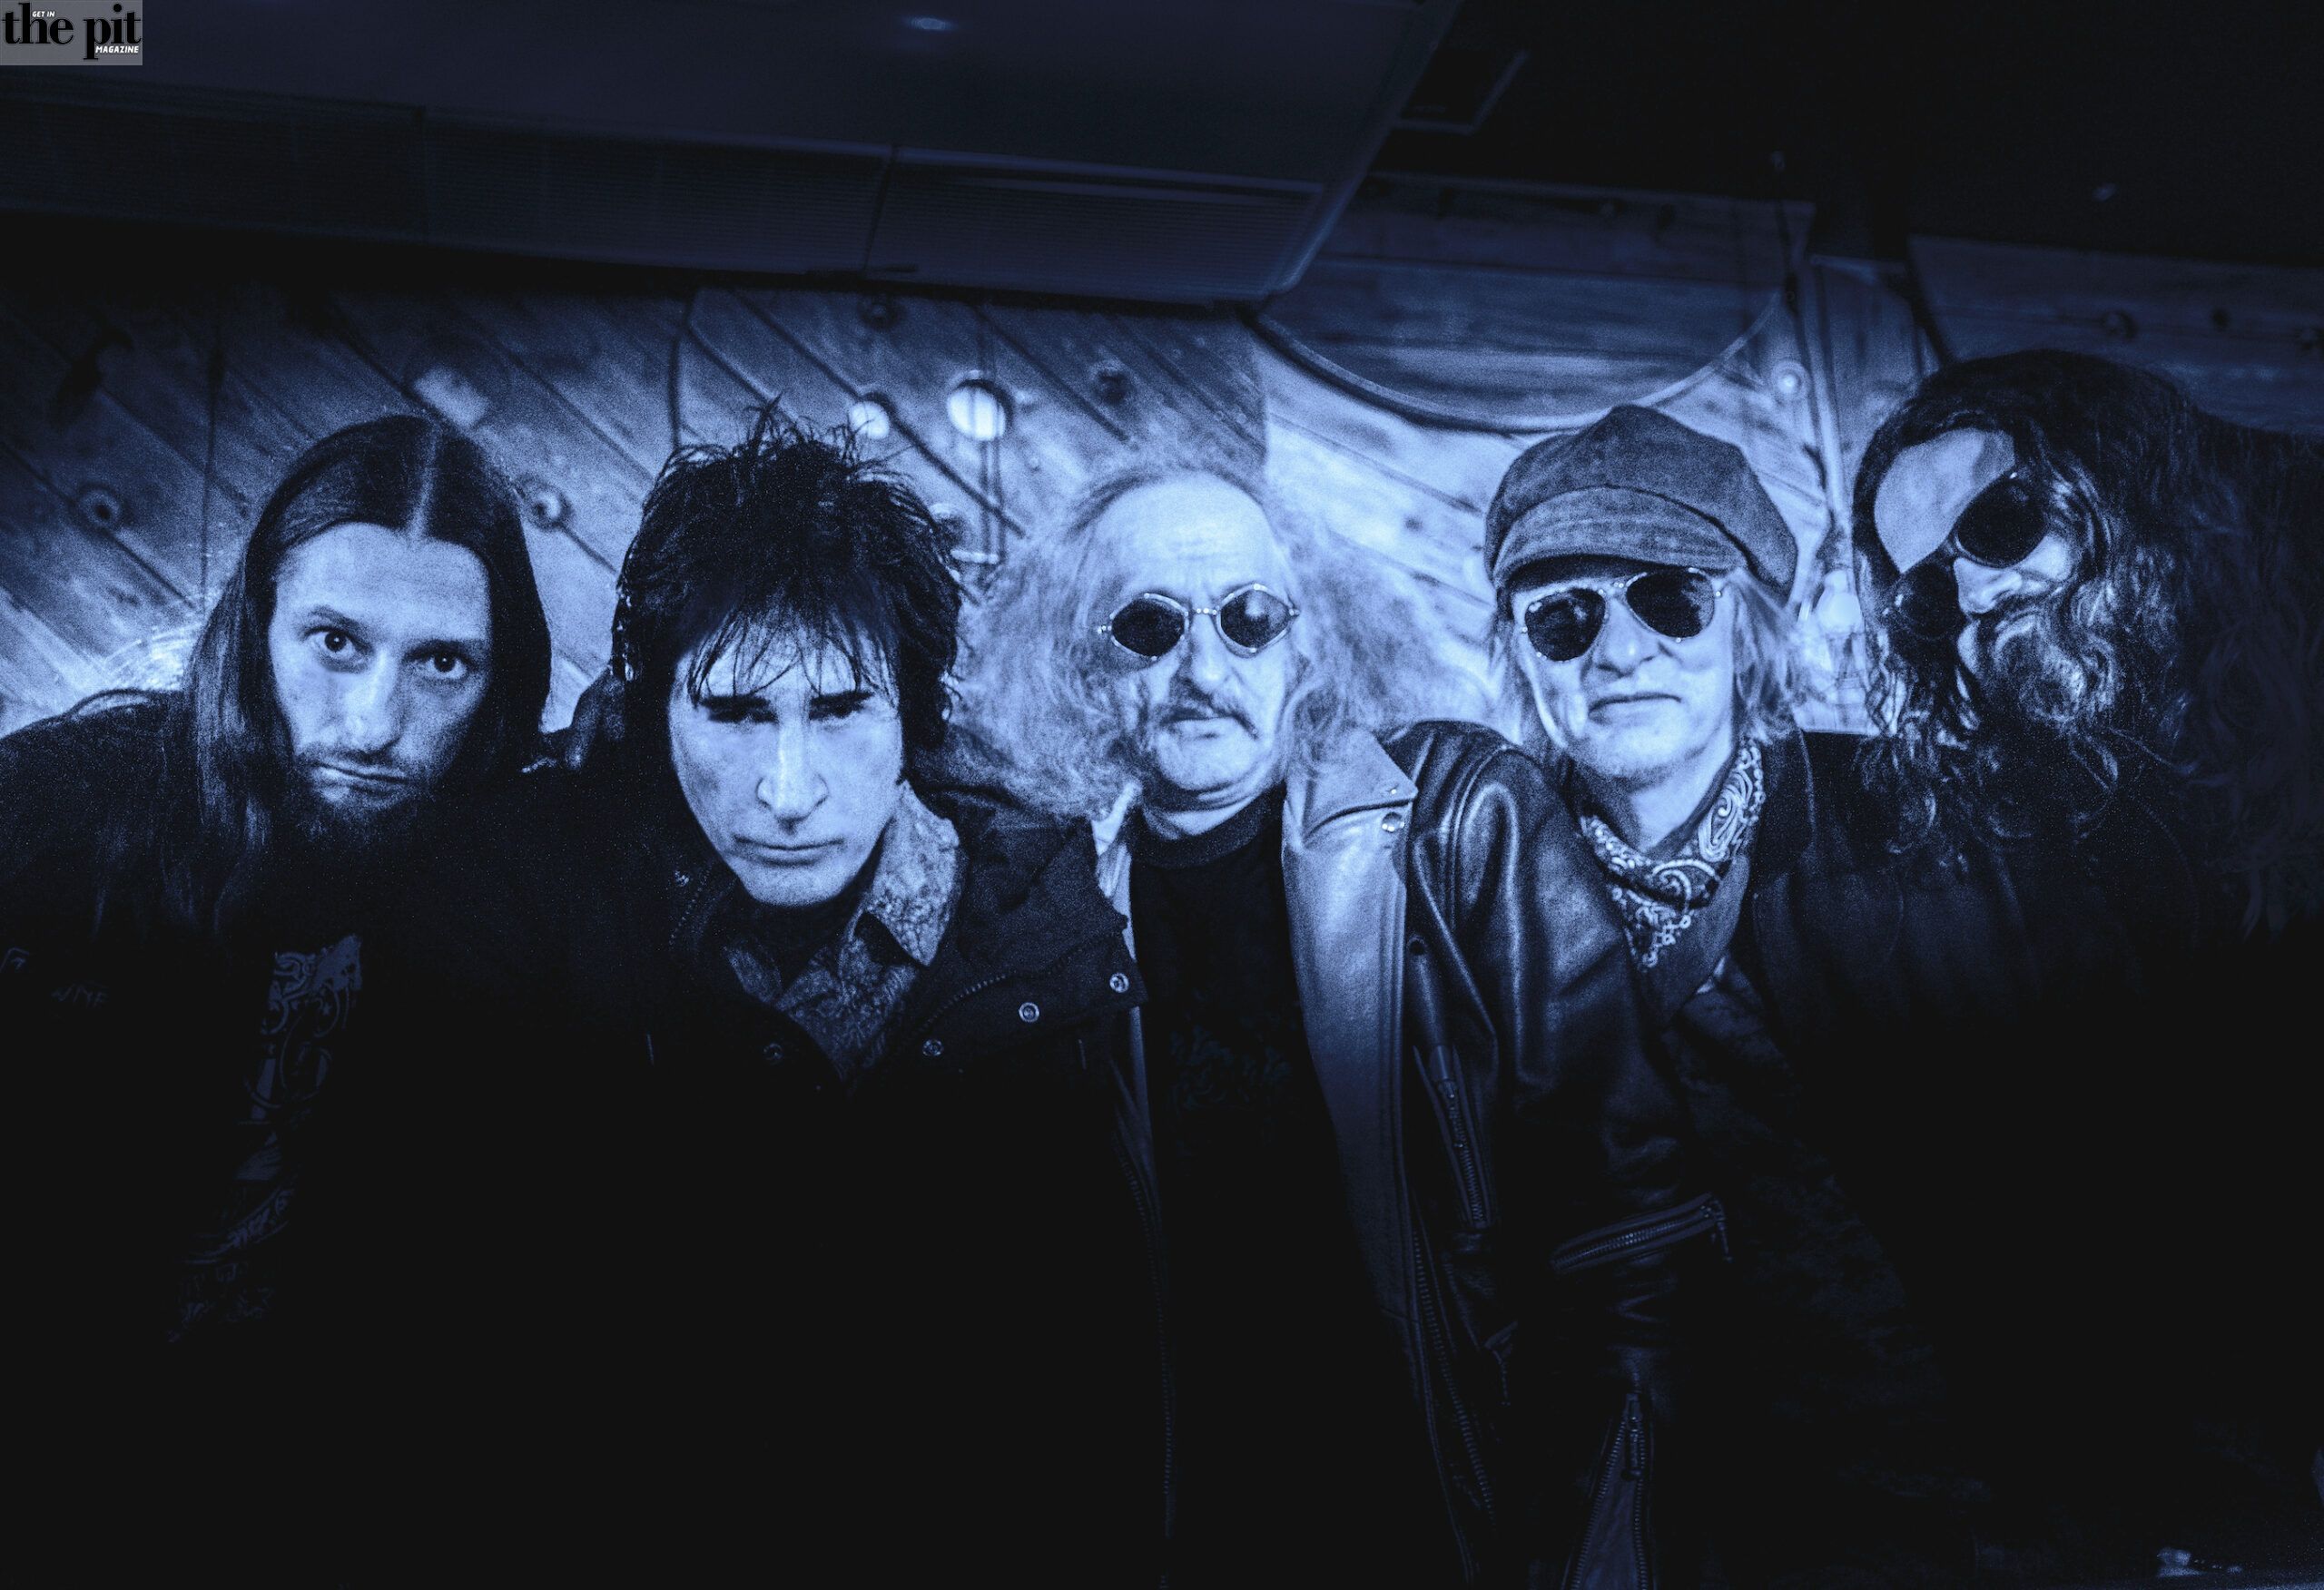 Five members of The Limit, a rock band, posing under blue stage lighting, with serious expressions, wearing dark, eclectic outfits.